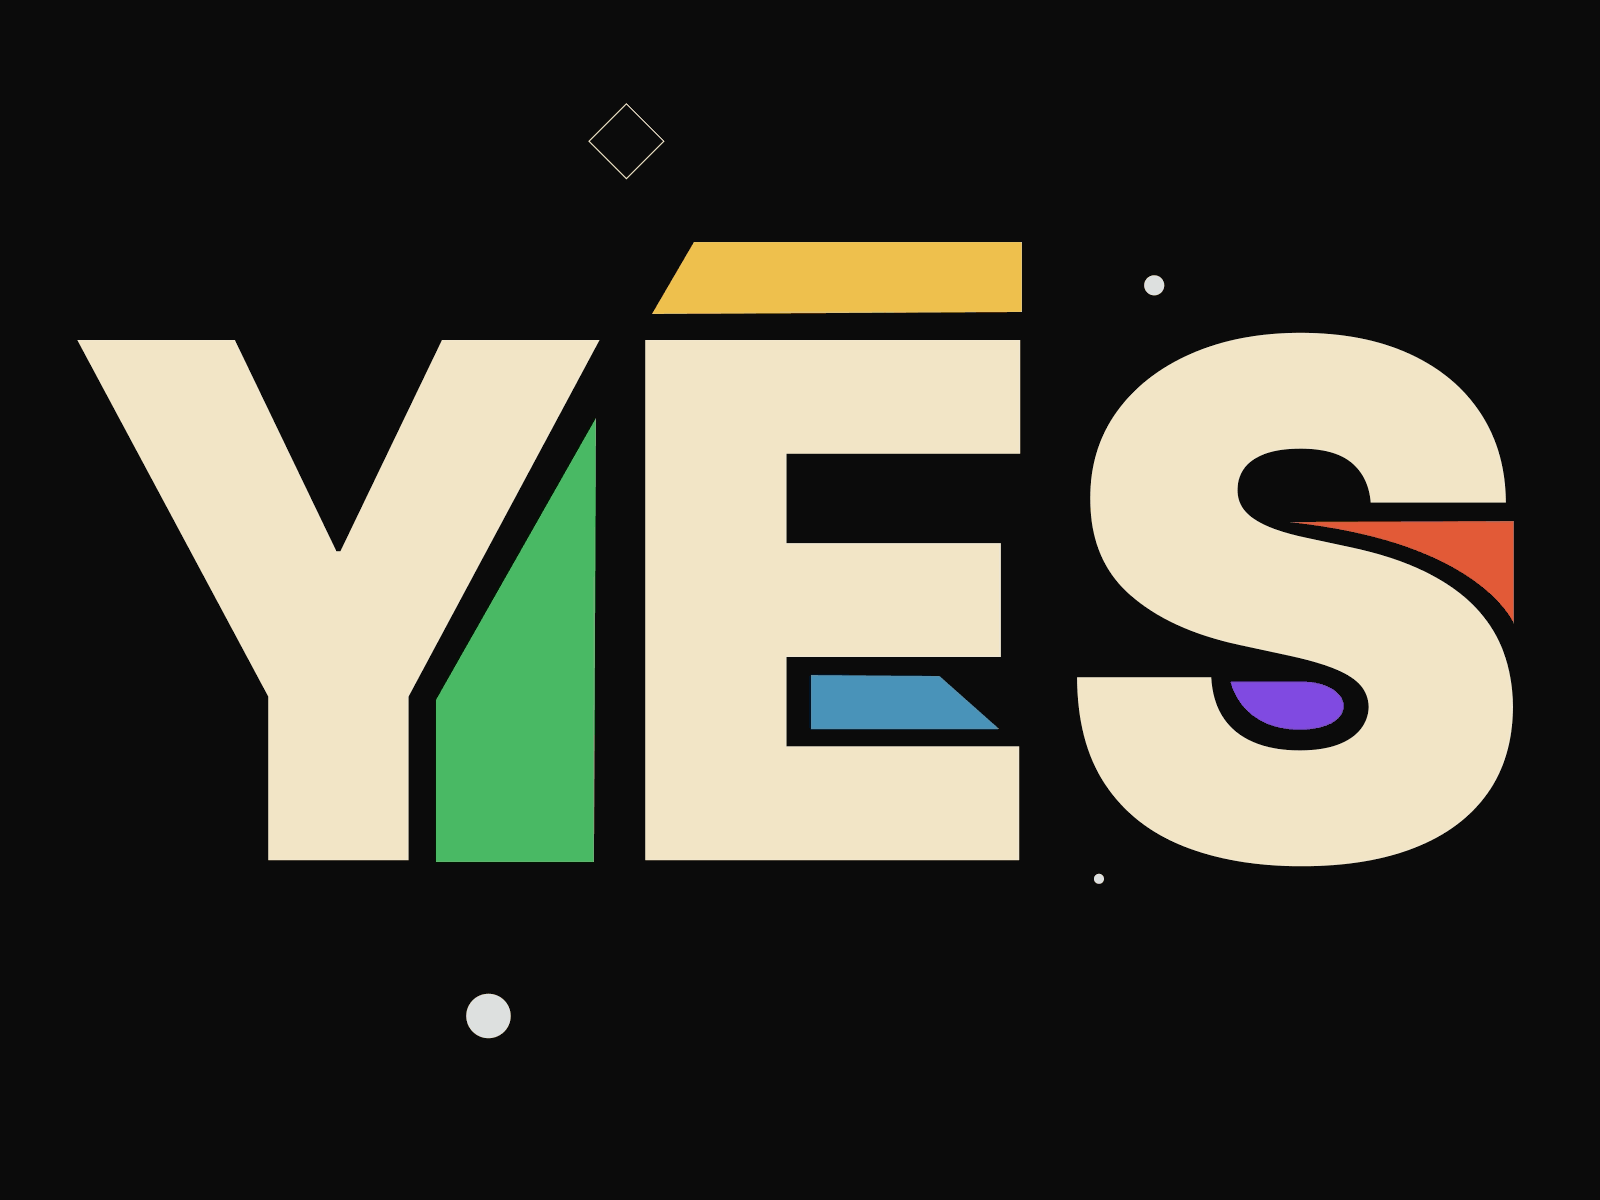 YES! animate animation art art direction artwork bold branding design font graphic design illustration motion motion graphics positive product type typography ui vector you can